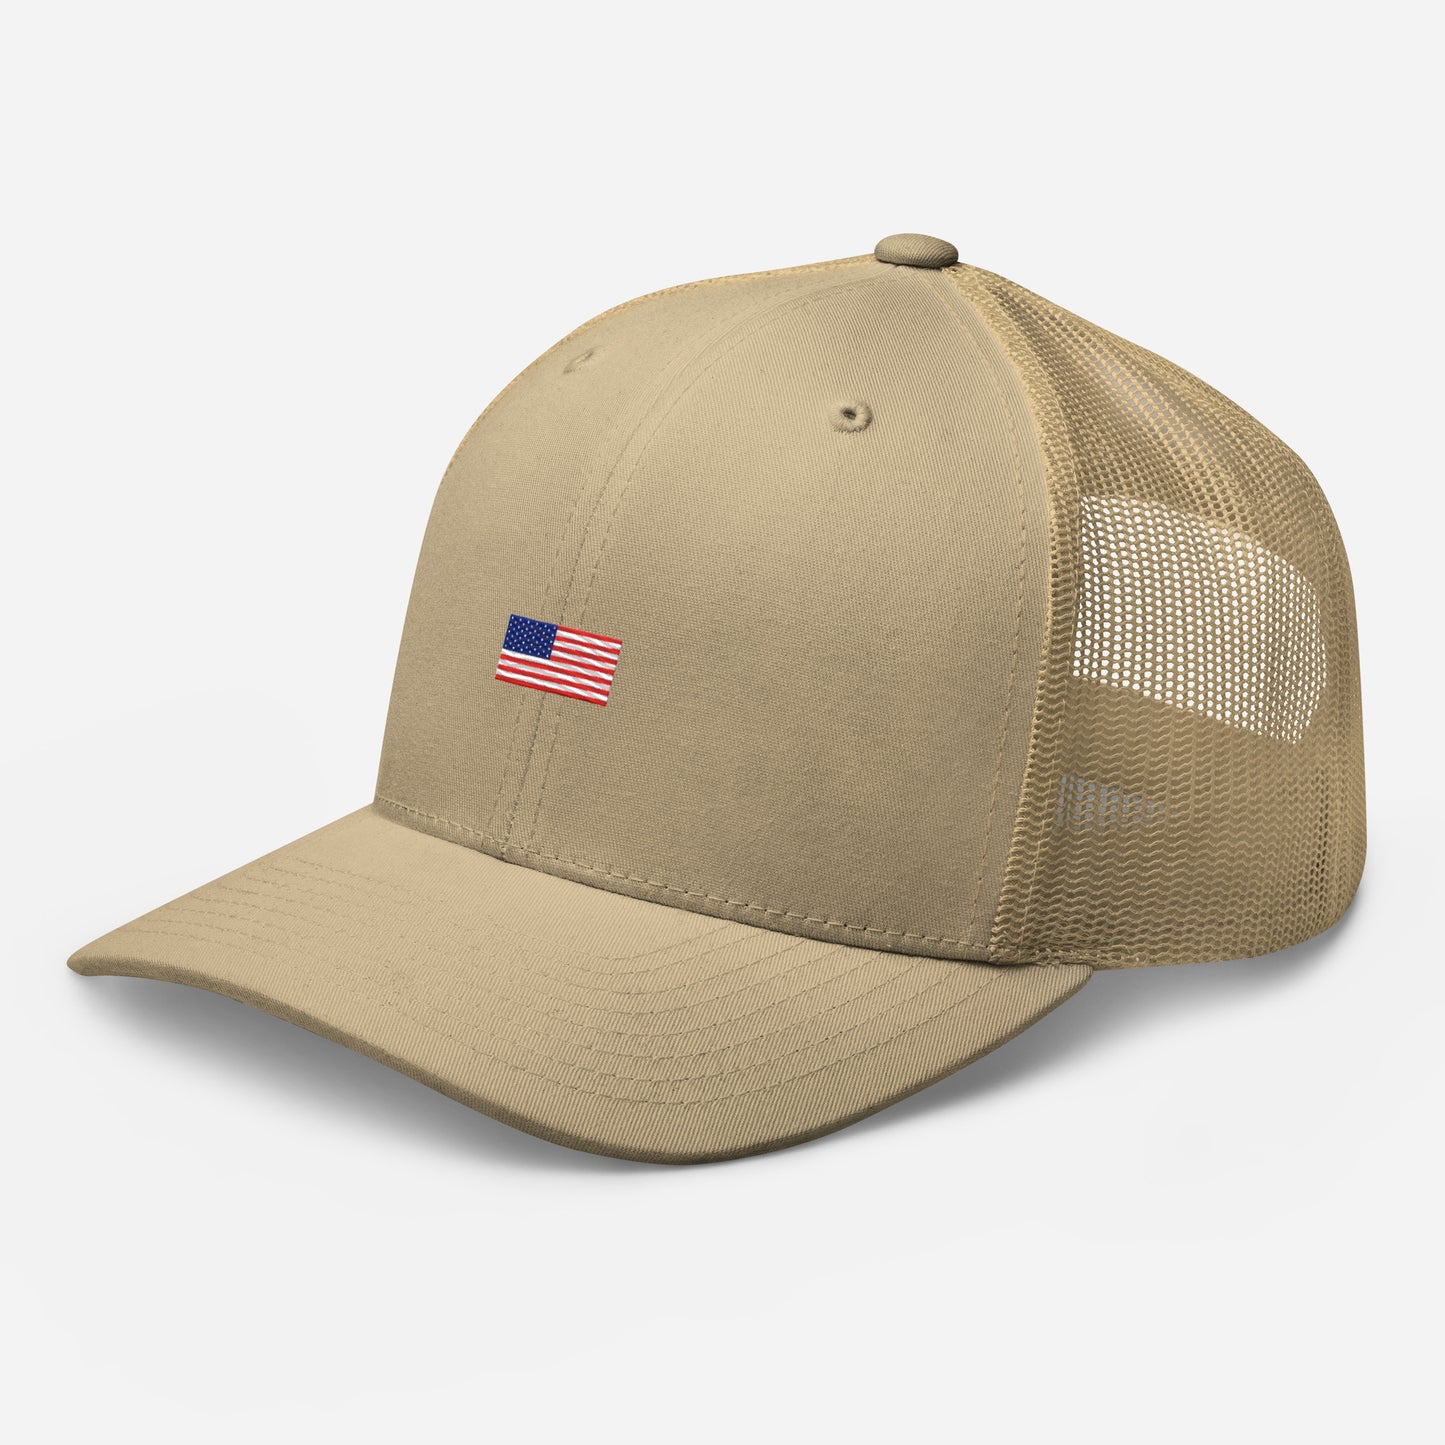 cap-from-the-front-with-american-flag